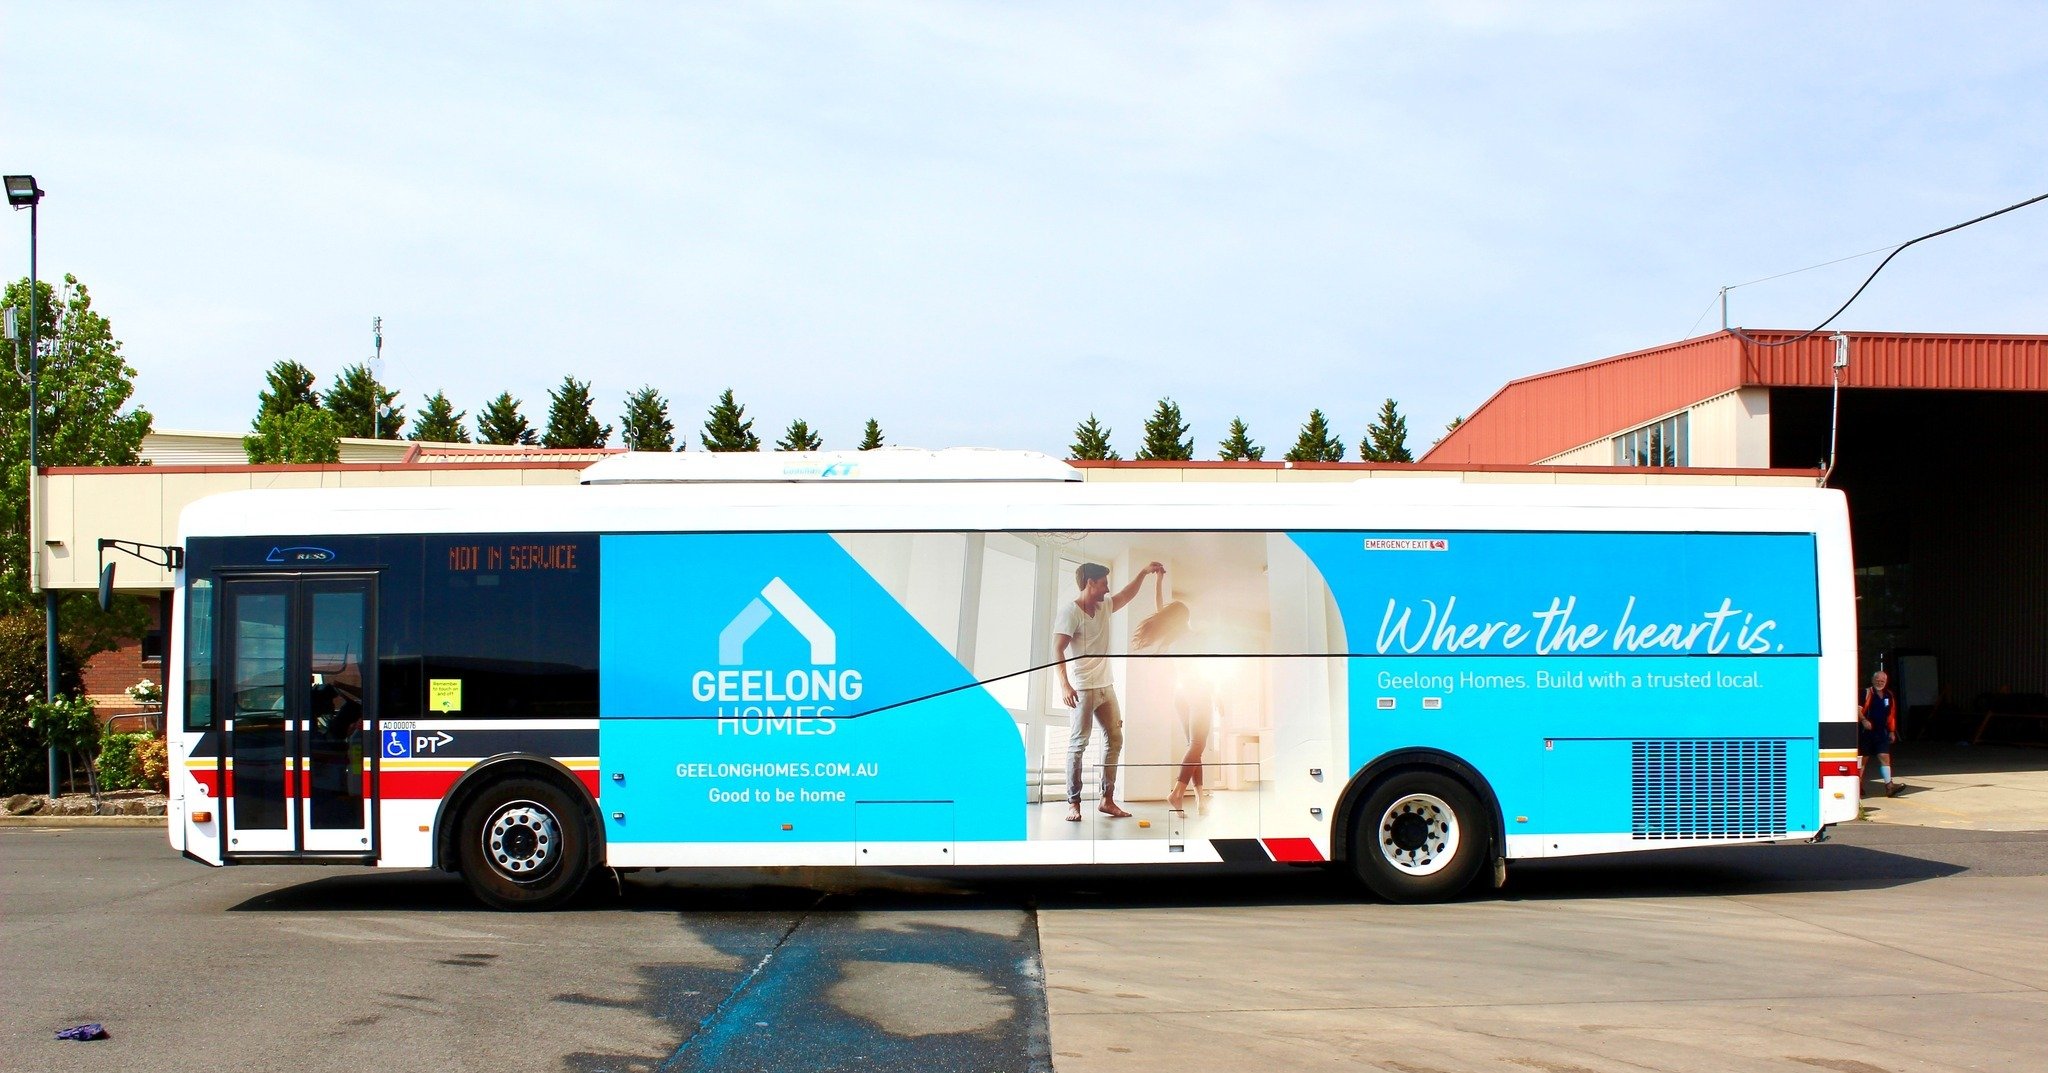 Get your message across like Geelong Homes, reminding us all that there's no place like home. It's more than a destination, it's where our heart finds solace. 🏠💖 @geelonghomes 

#ComfortZone #HomeSweetHome #GeelongHomes #ComfortZone #busadvertising